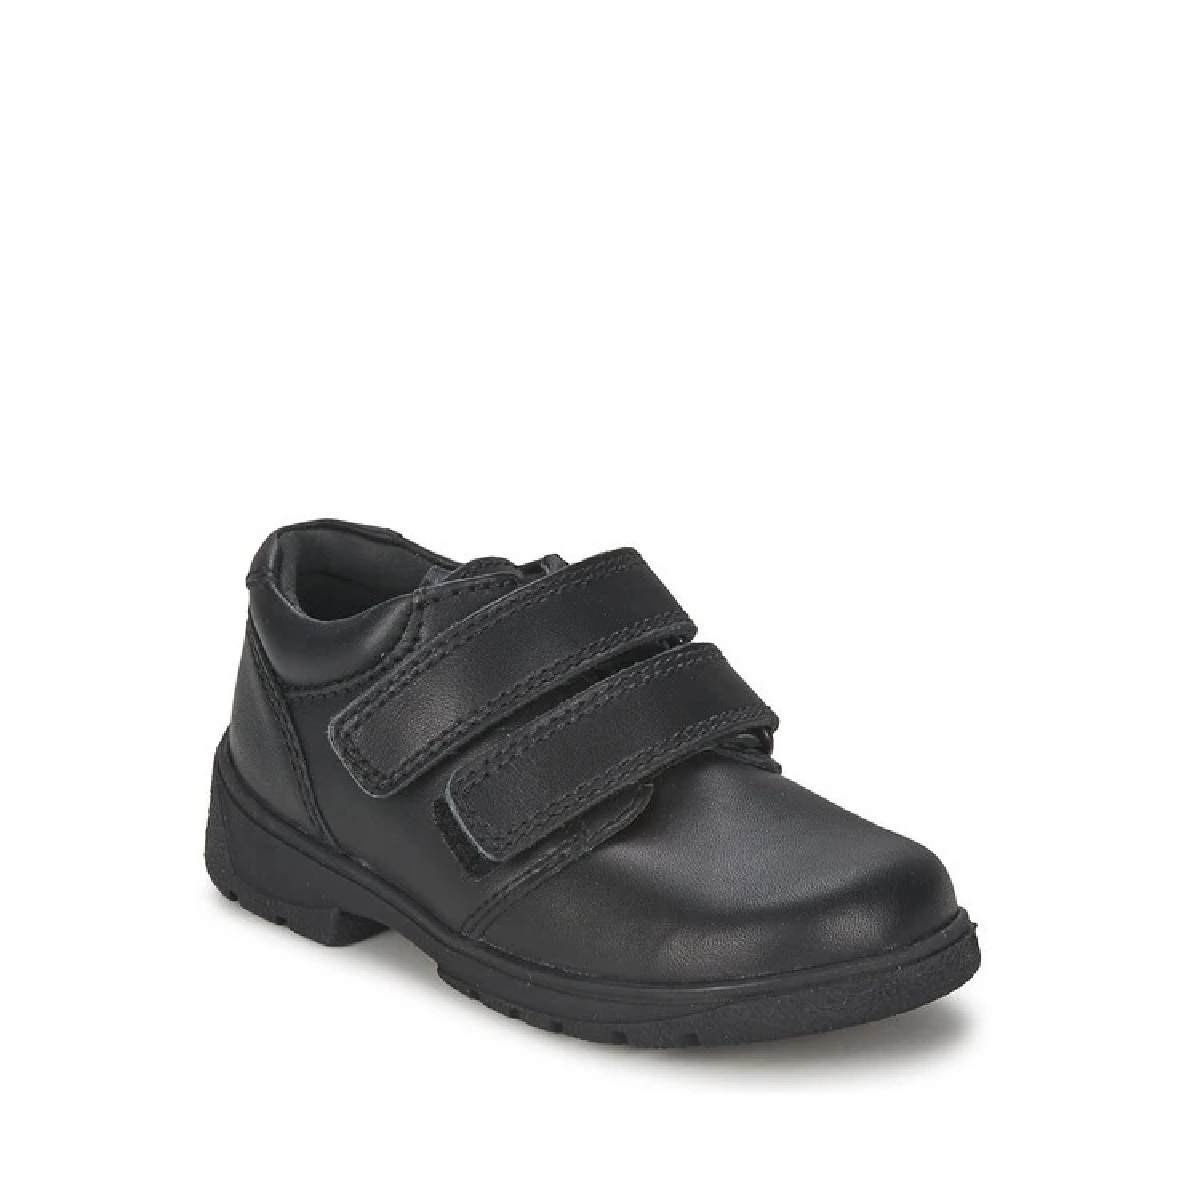 Boys Startrite Formal School Shoes Rotate 